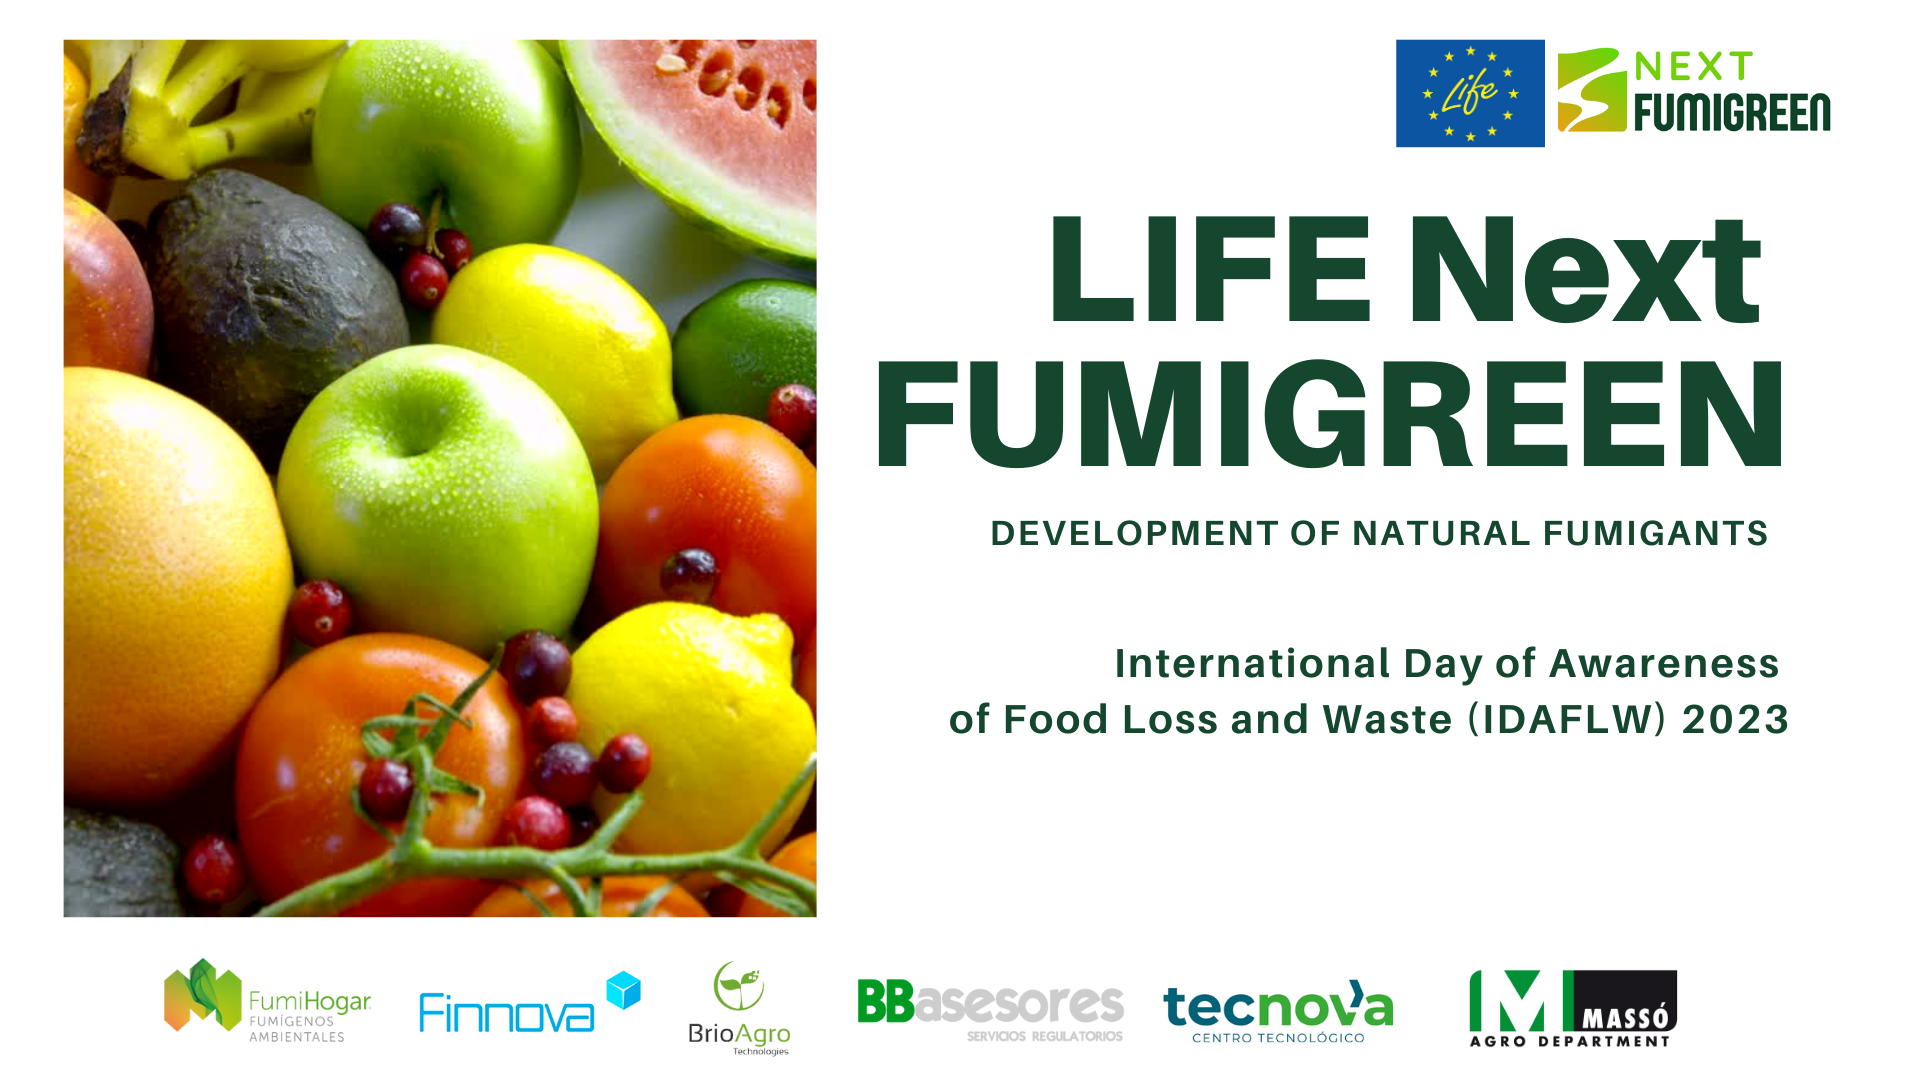 LIFE NextFUMIGREEN supports the safety and sustainability of food with natural fumigants